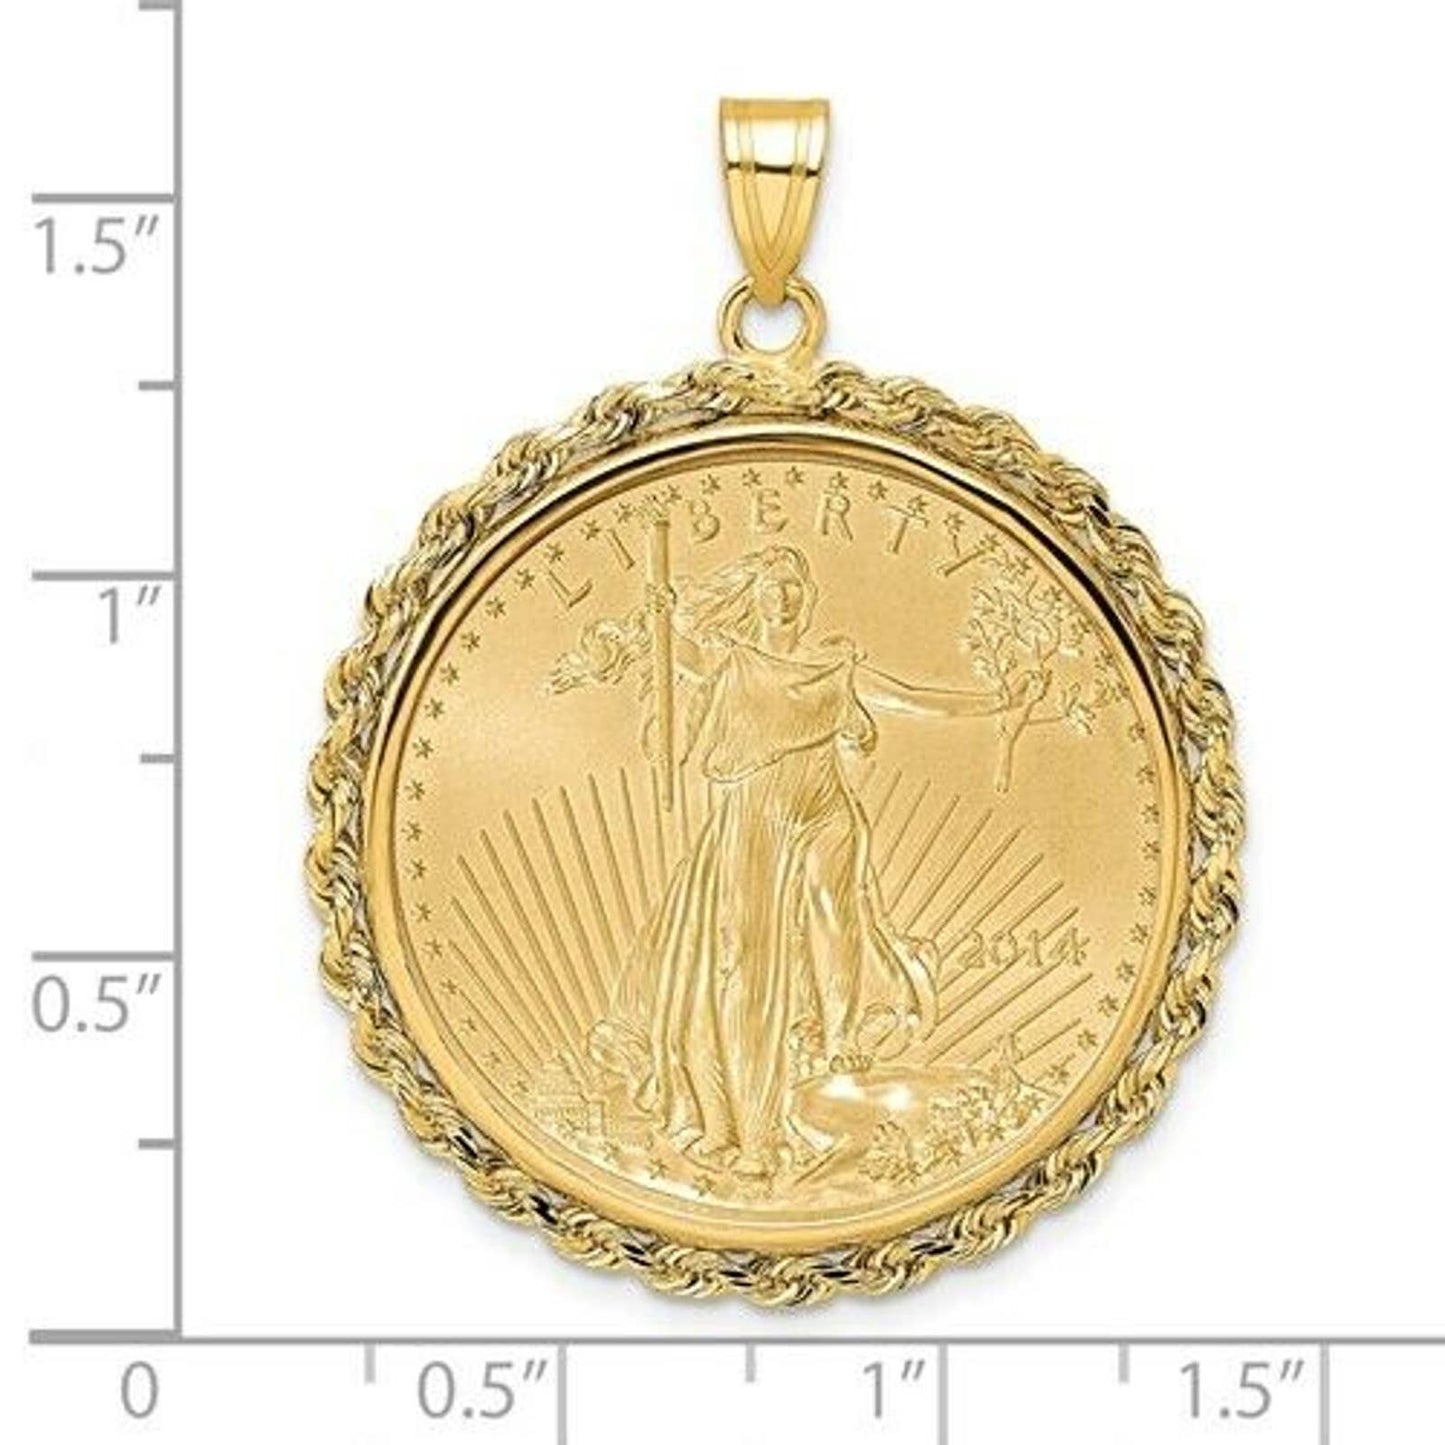 22k gold American Eagle 1/2 ounce coin mounted in 14k gold coin bezel